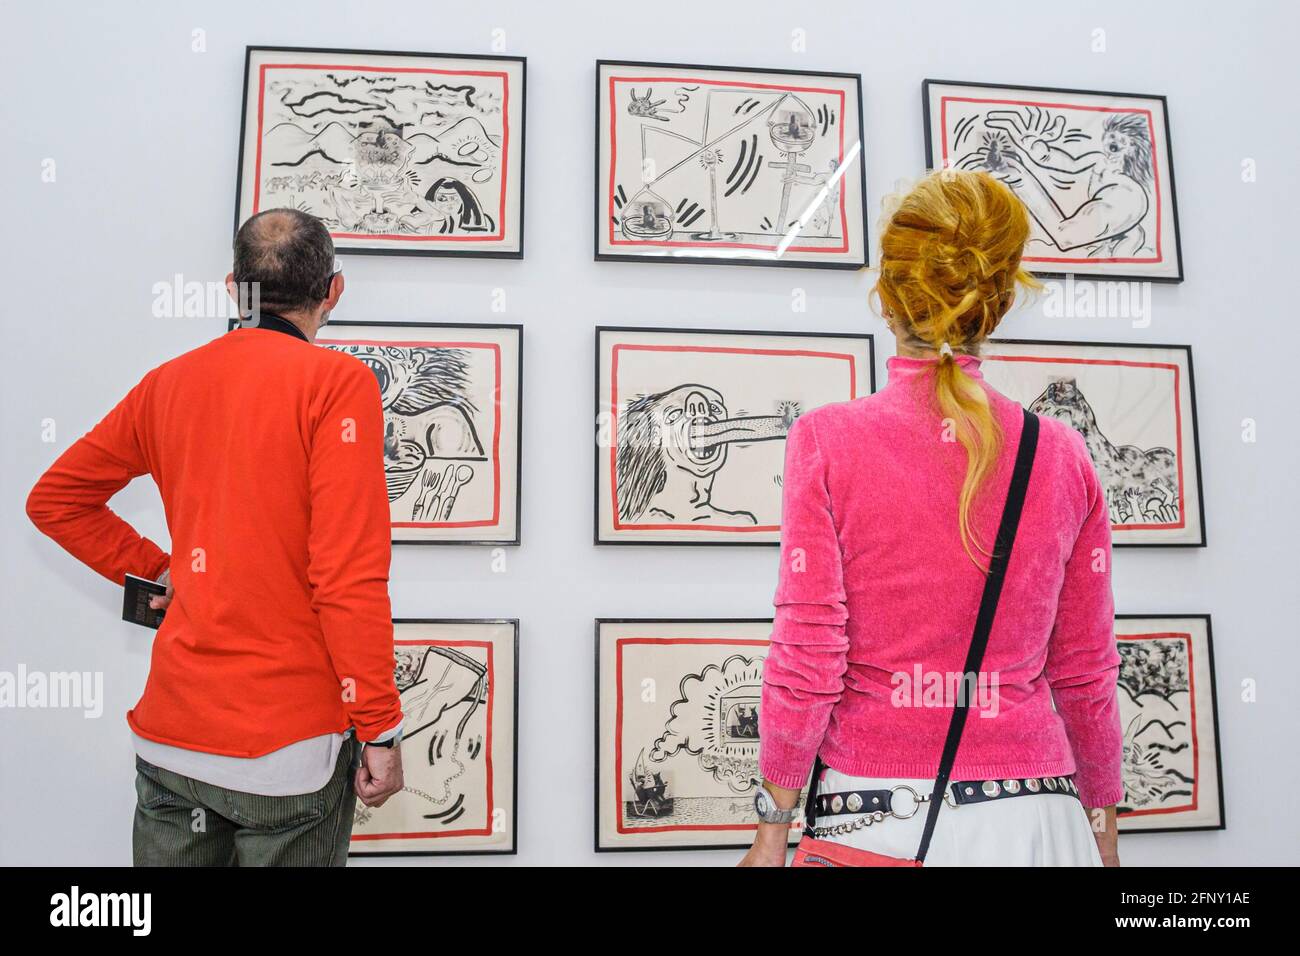 Miami Florida,Wynwood Arts & Design District,gallery Rubell Family Collection contemporary art,man woman female couple looking drawings, Stock Photo